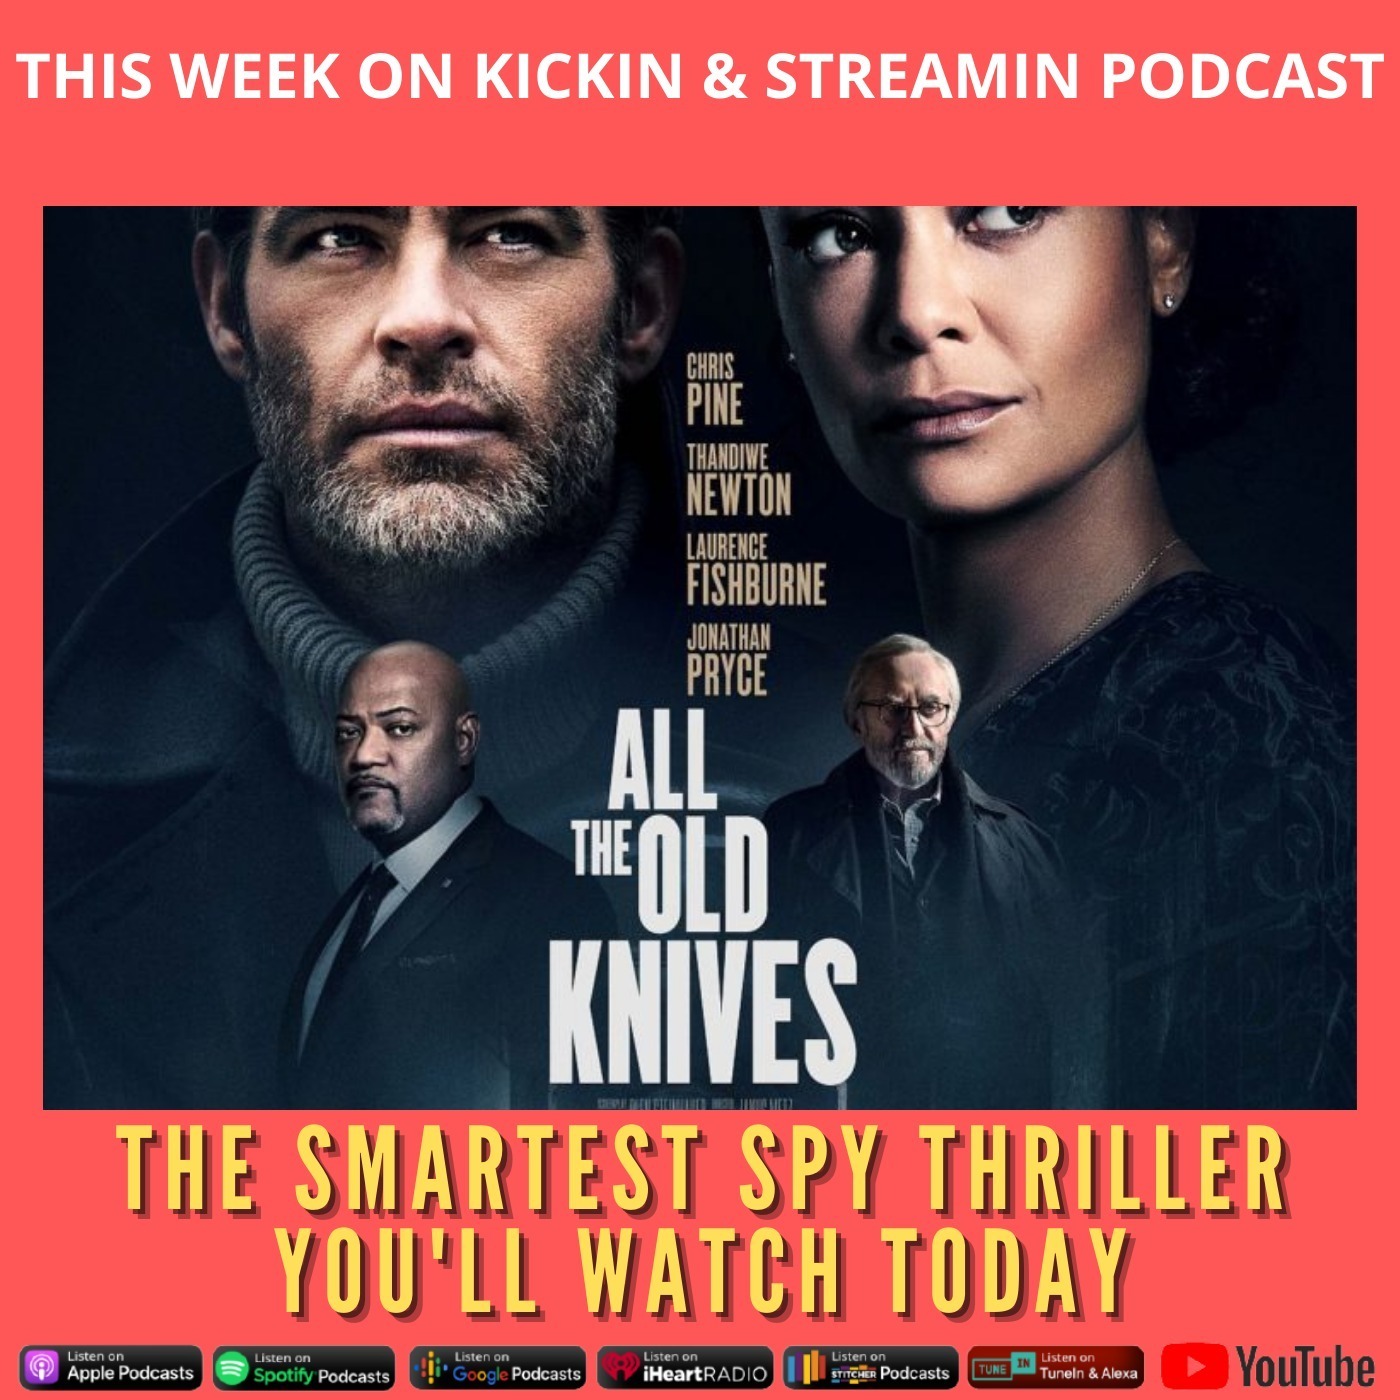 All The Old Knives: The Smartest Spy Thriller You'll Watch Today